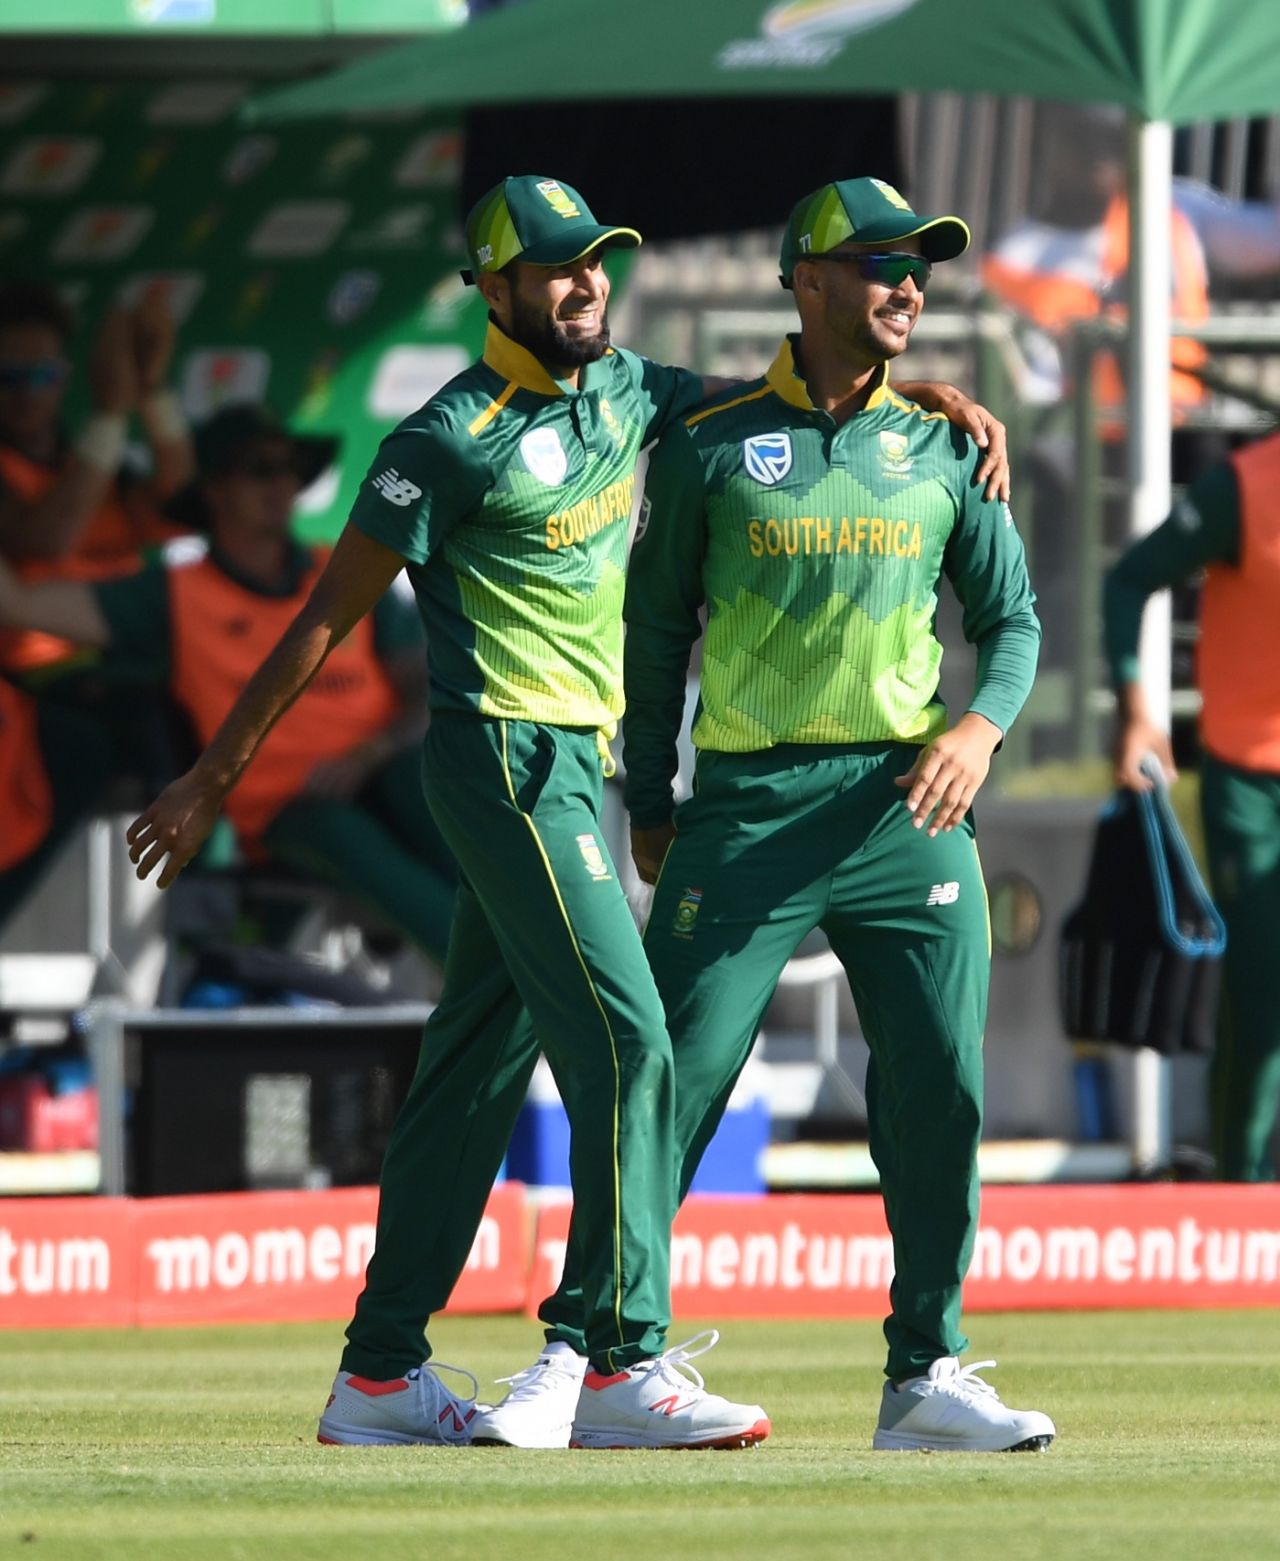 A joyous moment for Imran Tahir and JP Duminy during their last ODI at home, South Africa v Sri Lanka, 5th ODI, Cape Town, March 16, 2019